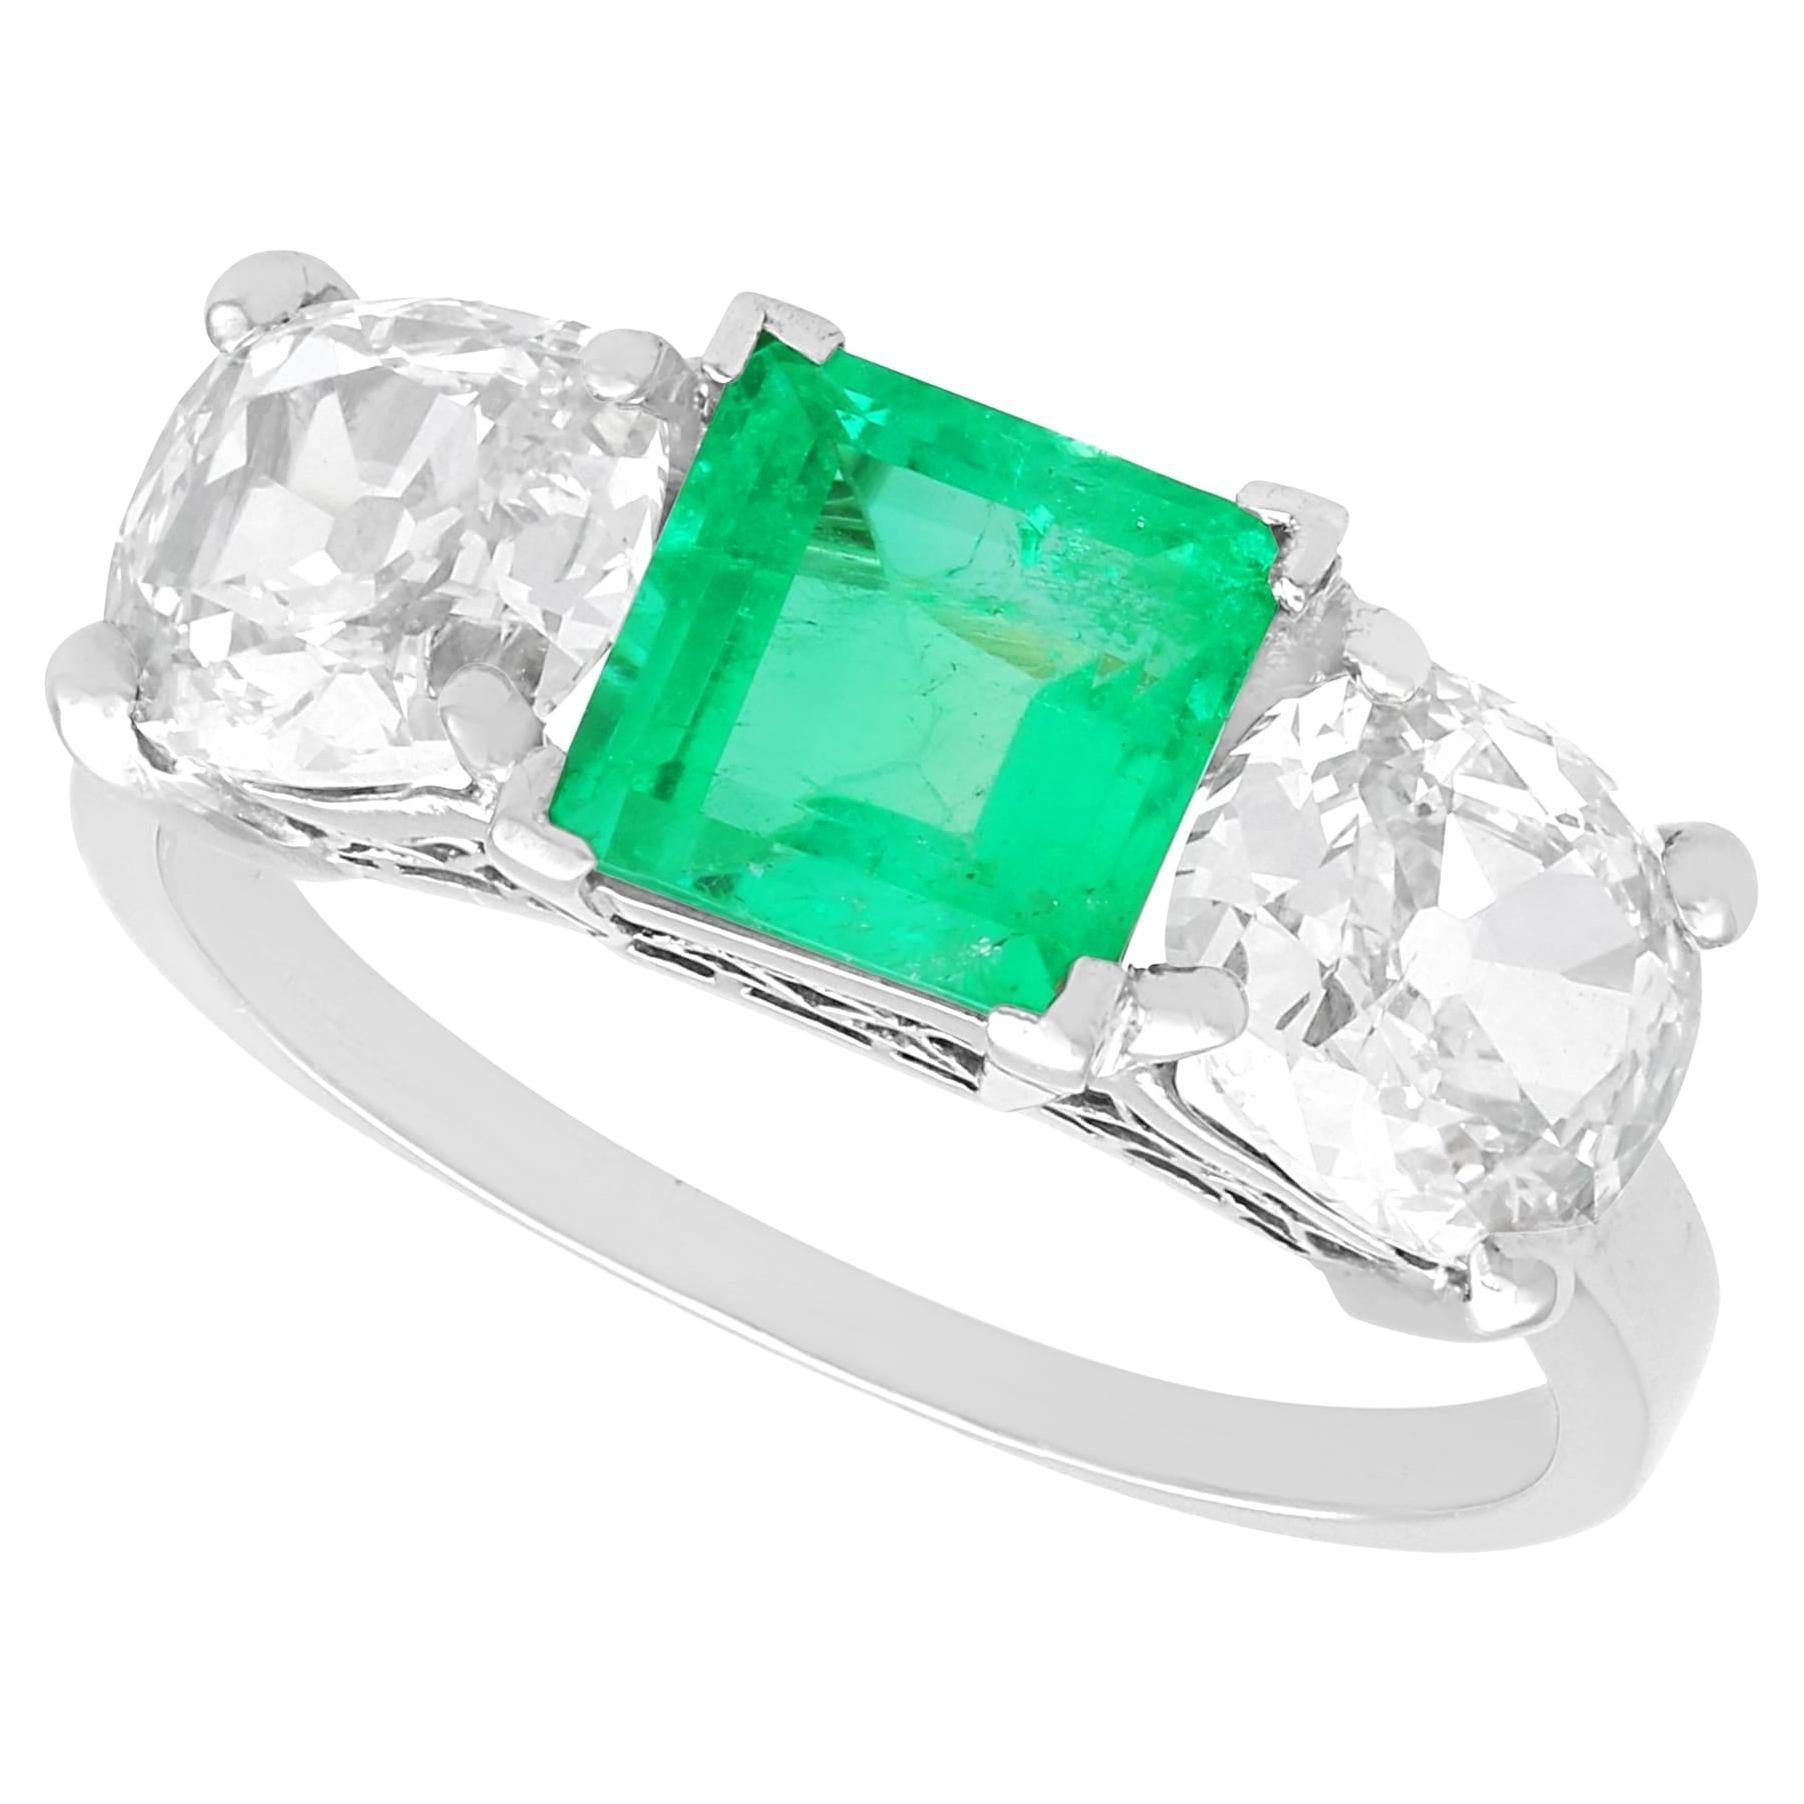 Antique 1.11 Carat Colombian Emerald and 1.33 Carat Diamond Trilogy Ring 